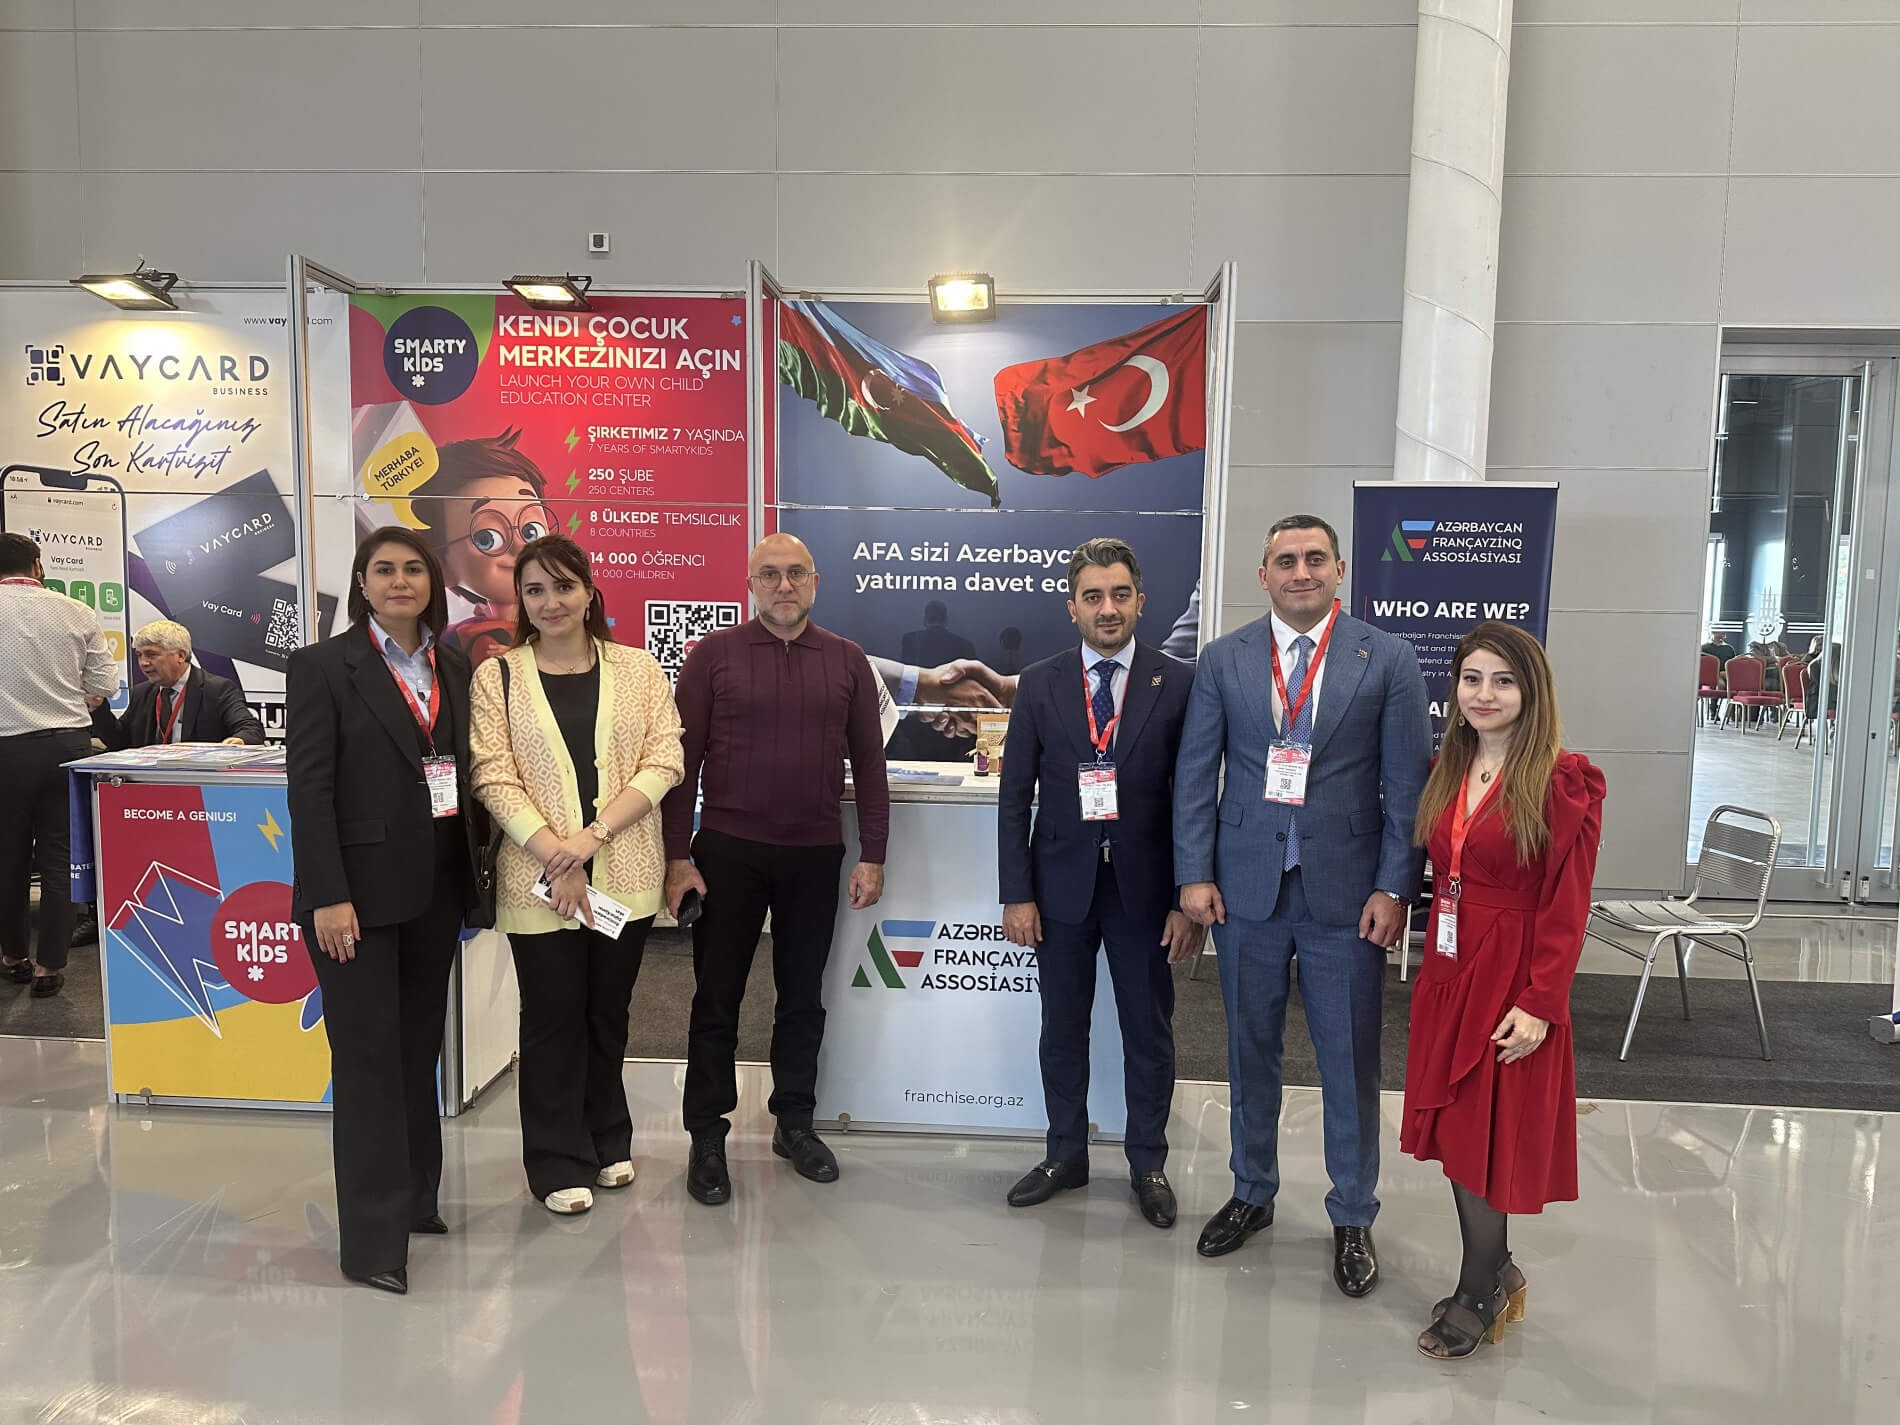 The Deputy Chairman of KOBIA and the Head of KOBSKA visited the stand of the Azerbaijan Franchise Association at the “Bayim Olurmusun” forum.